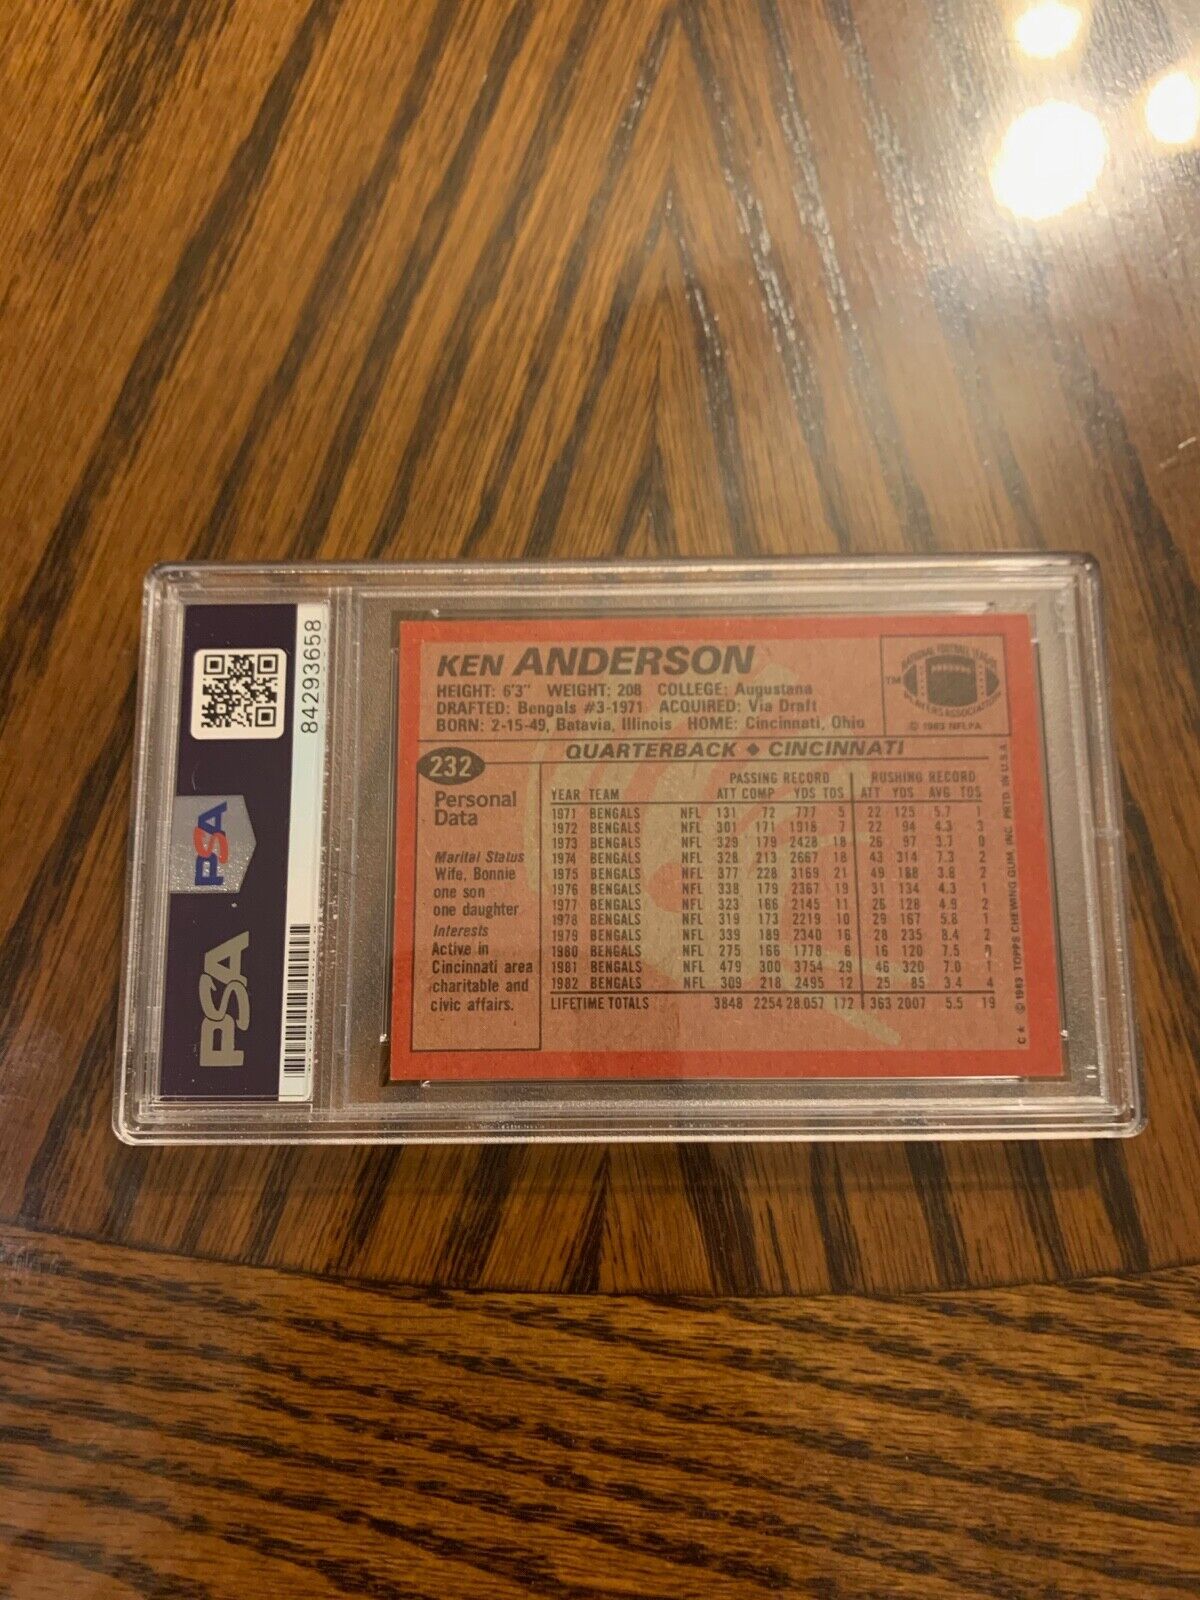 Ken Anderson Autographed 1983 Topps Football Card 232 PSA Slabbed & Certified